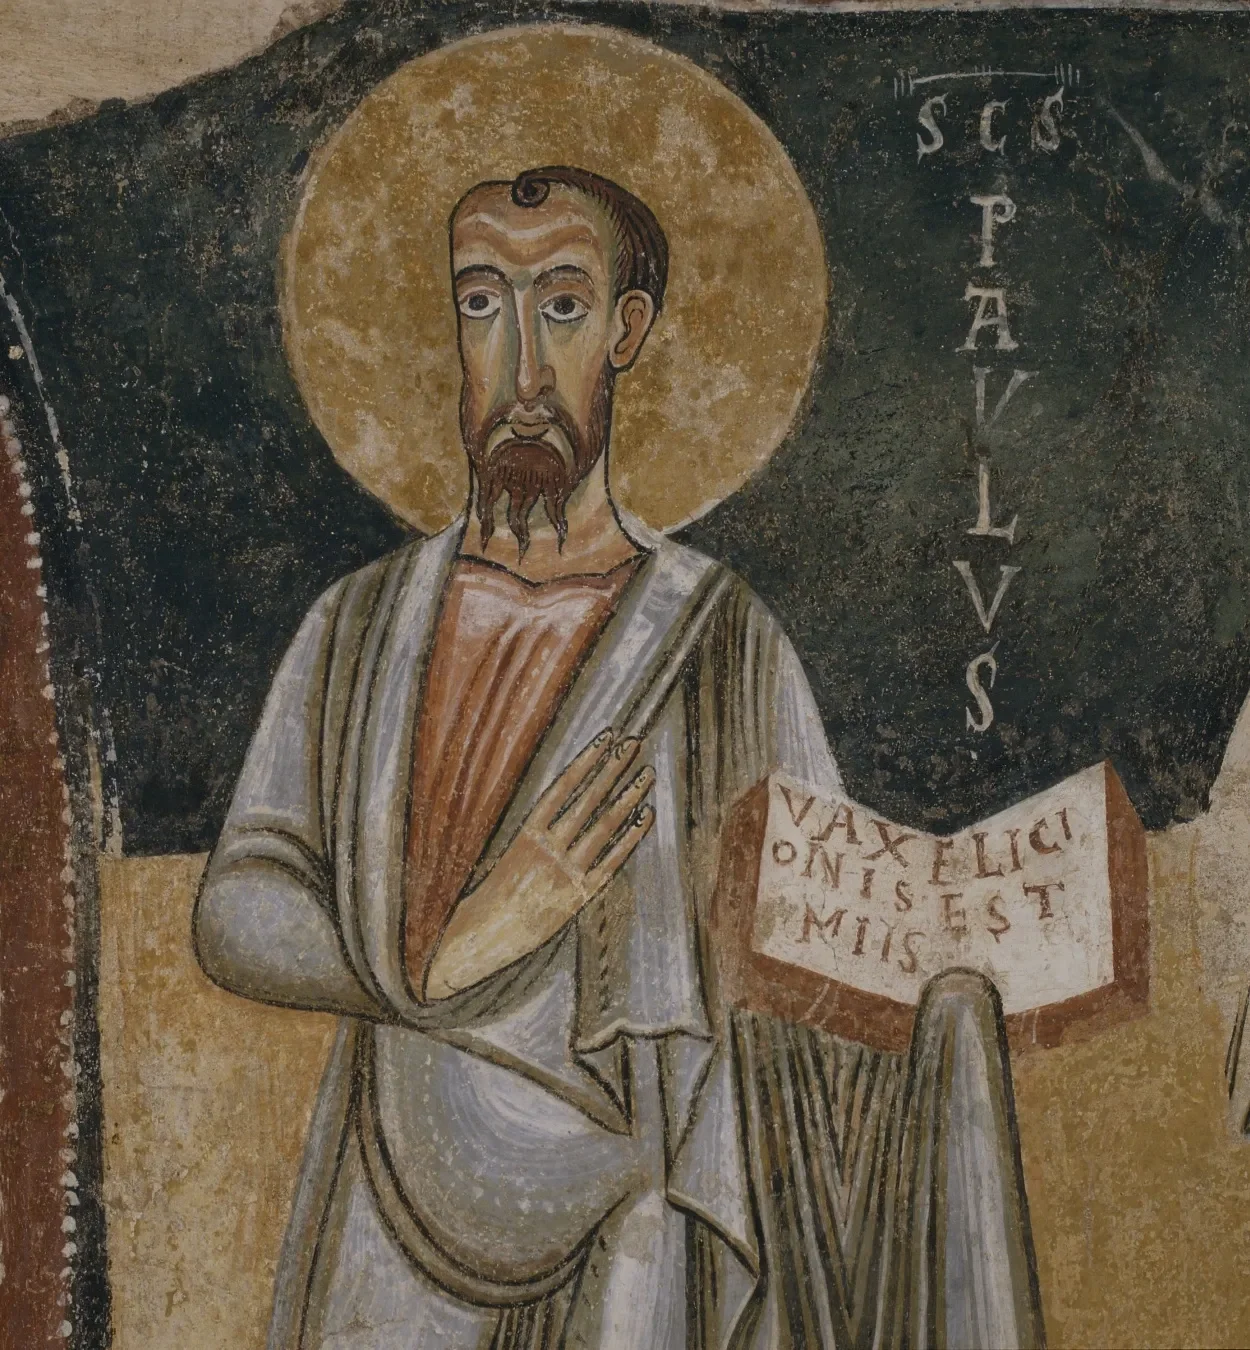 Ancient depiction of the apostle Paul. Image Source: WikiMedia Commons